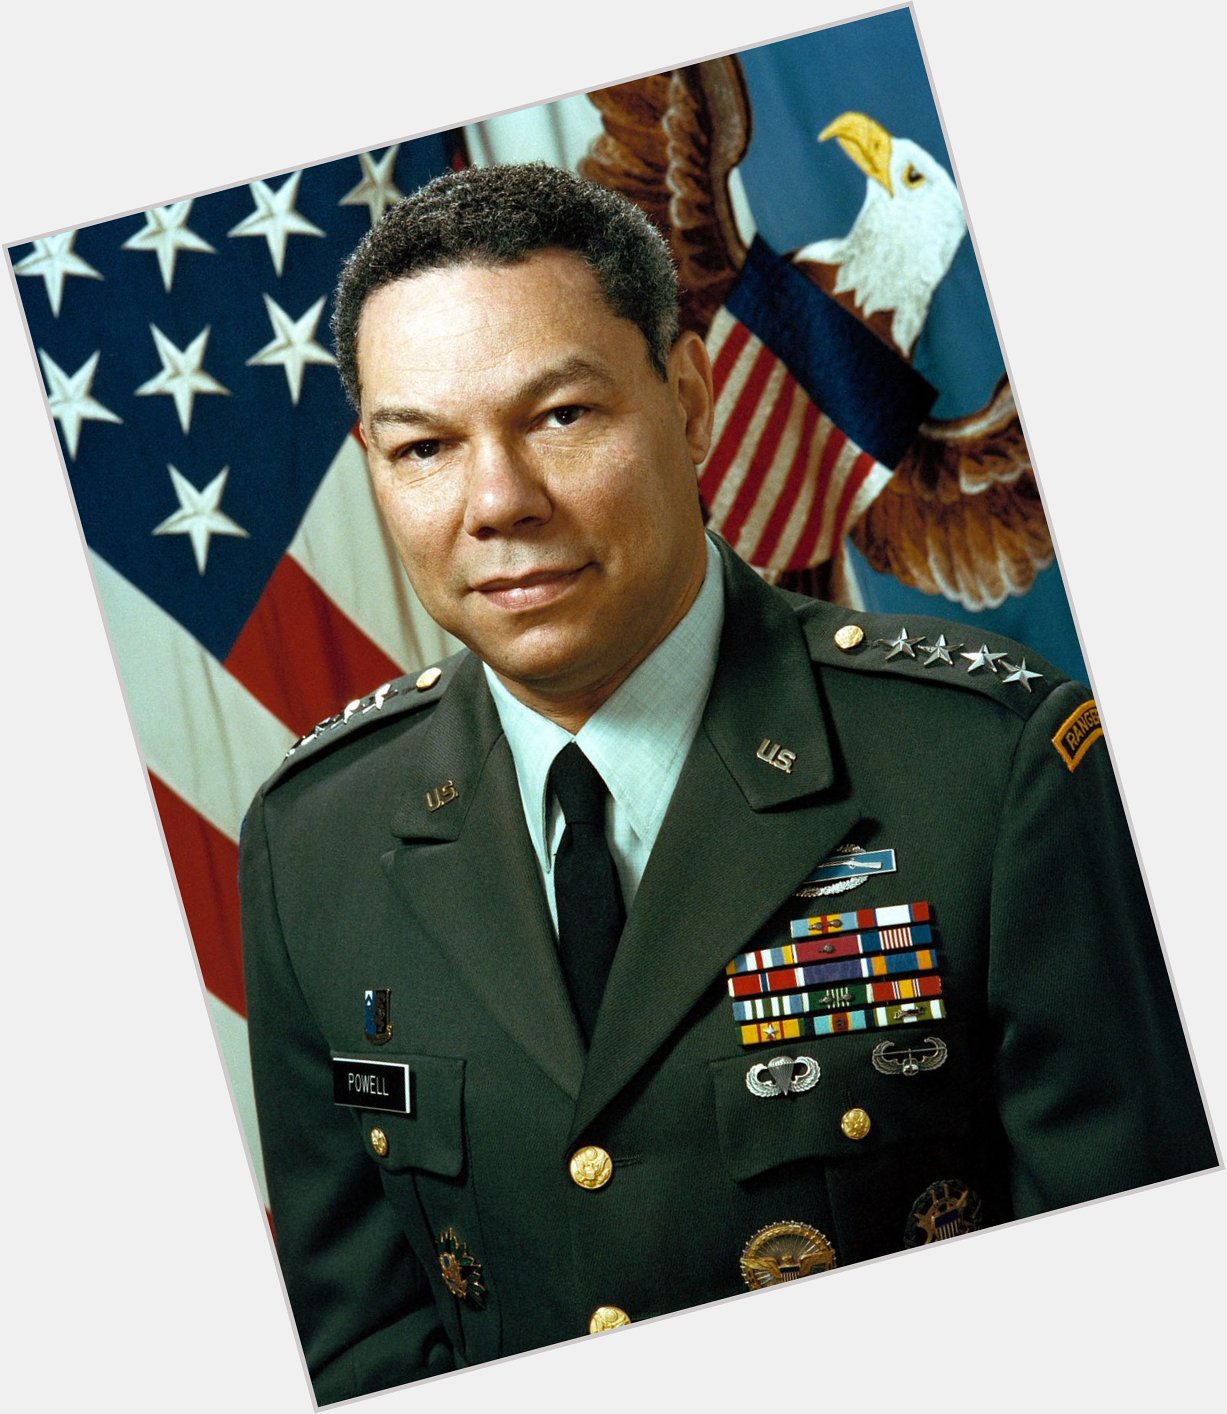 Happy Birthday to Colin Powell, who turns 78 today! 